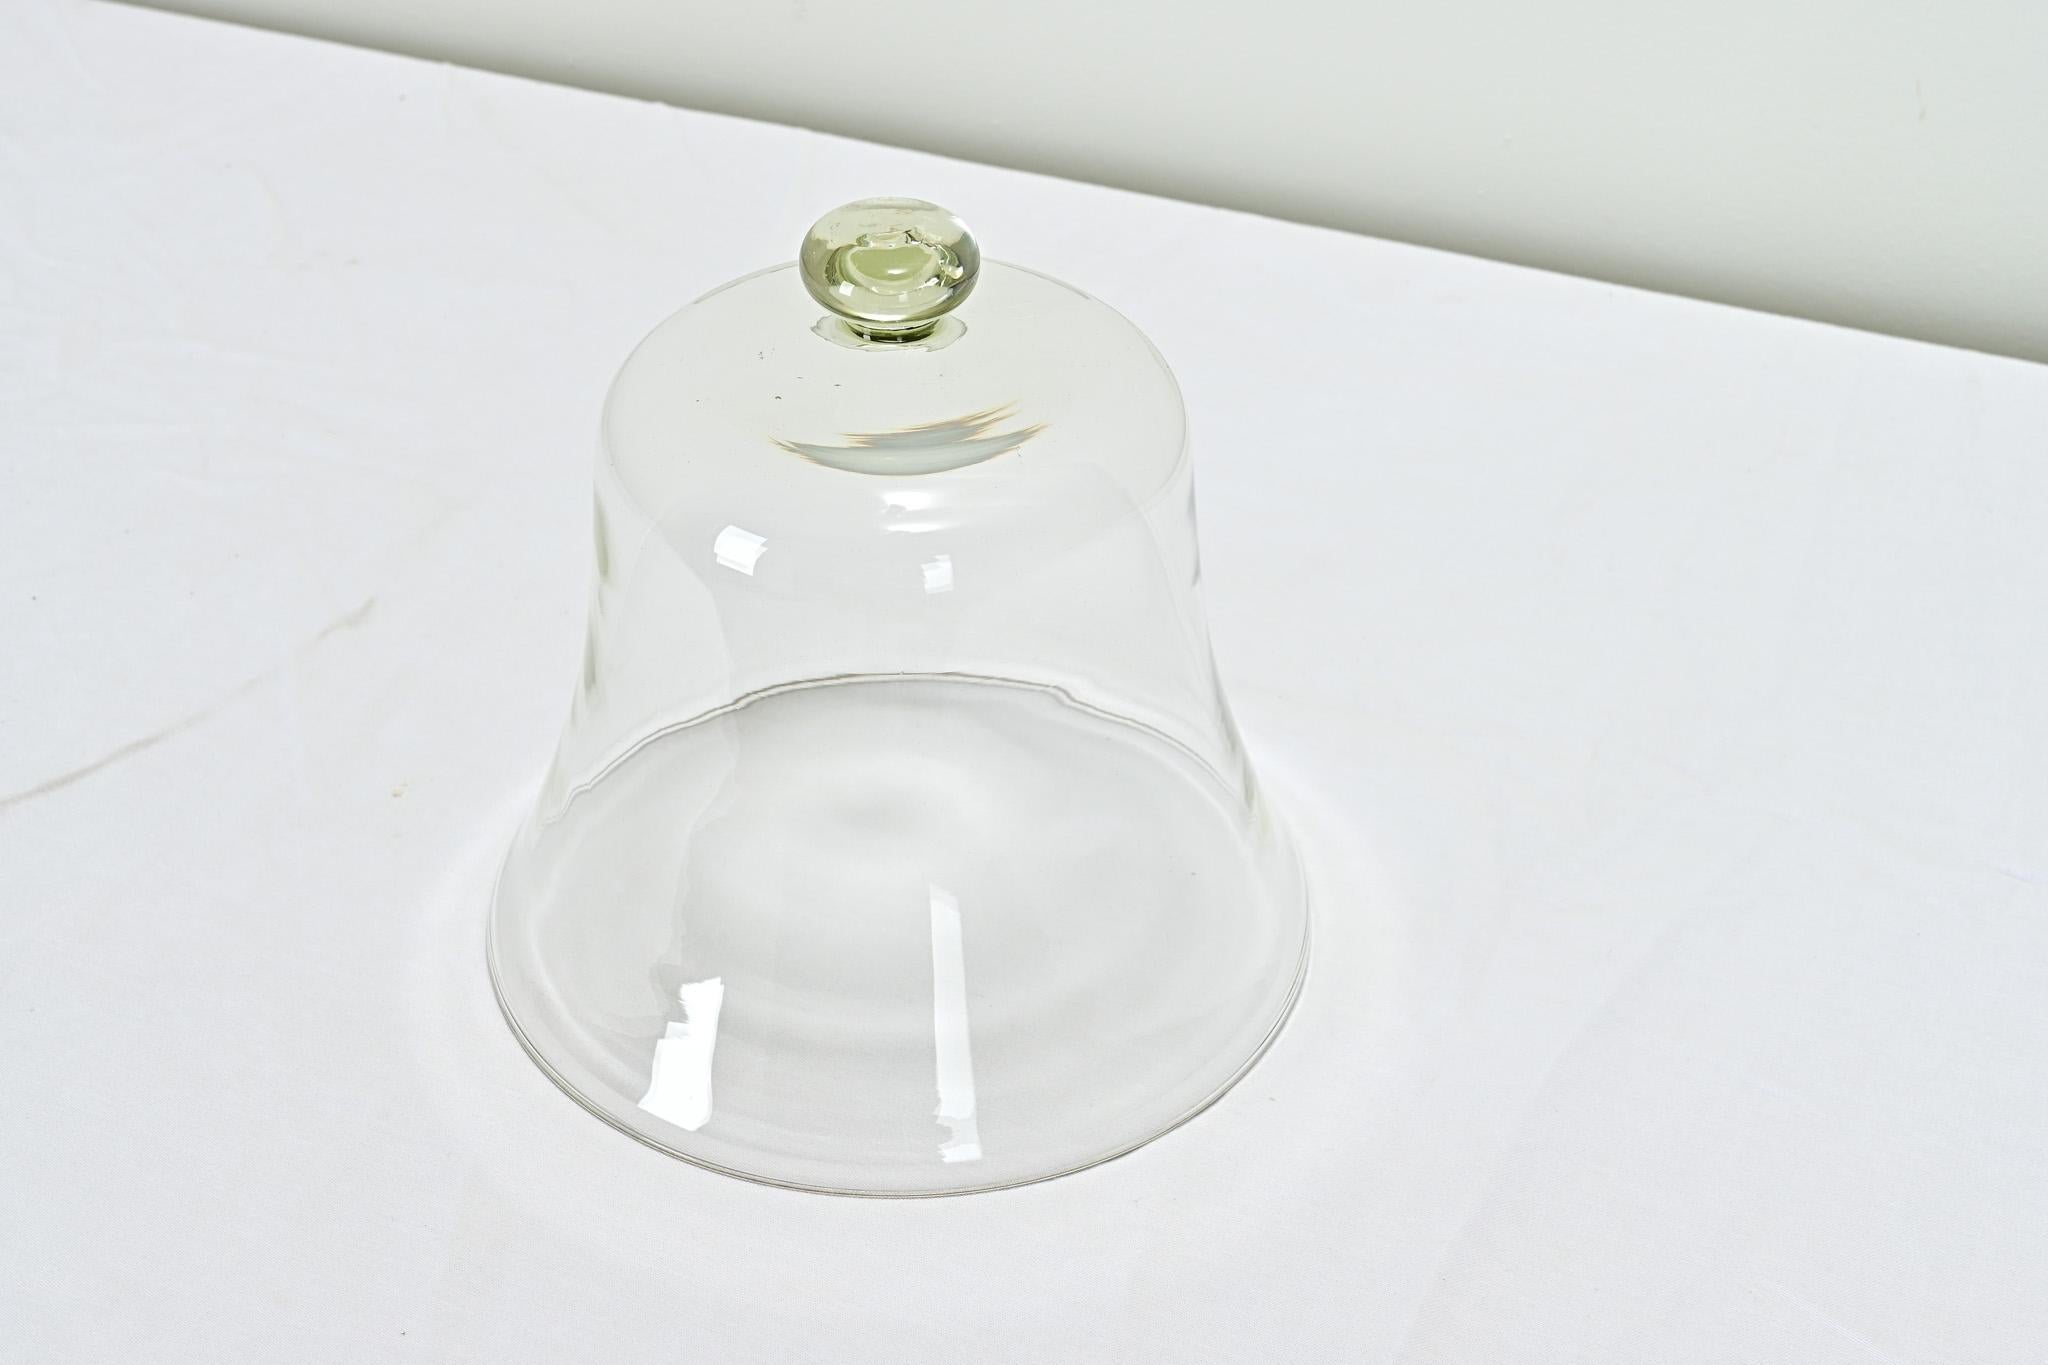 A French hand blown dome used for covering cheese or pastries, most likely for display in a mercantile shop. Be sure to view the detailed images of this culinary antique.